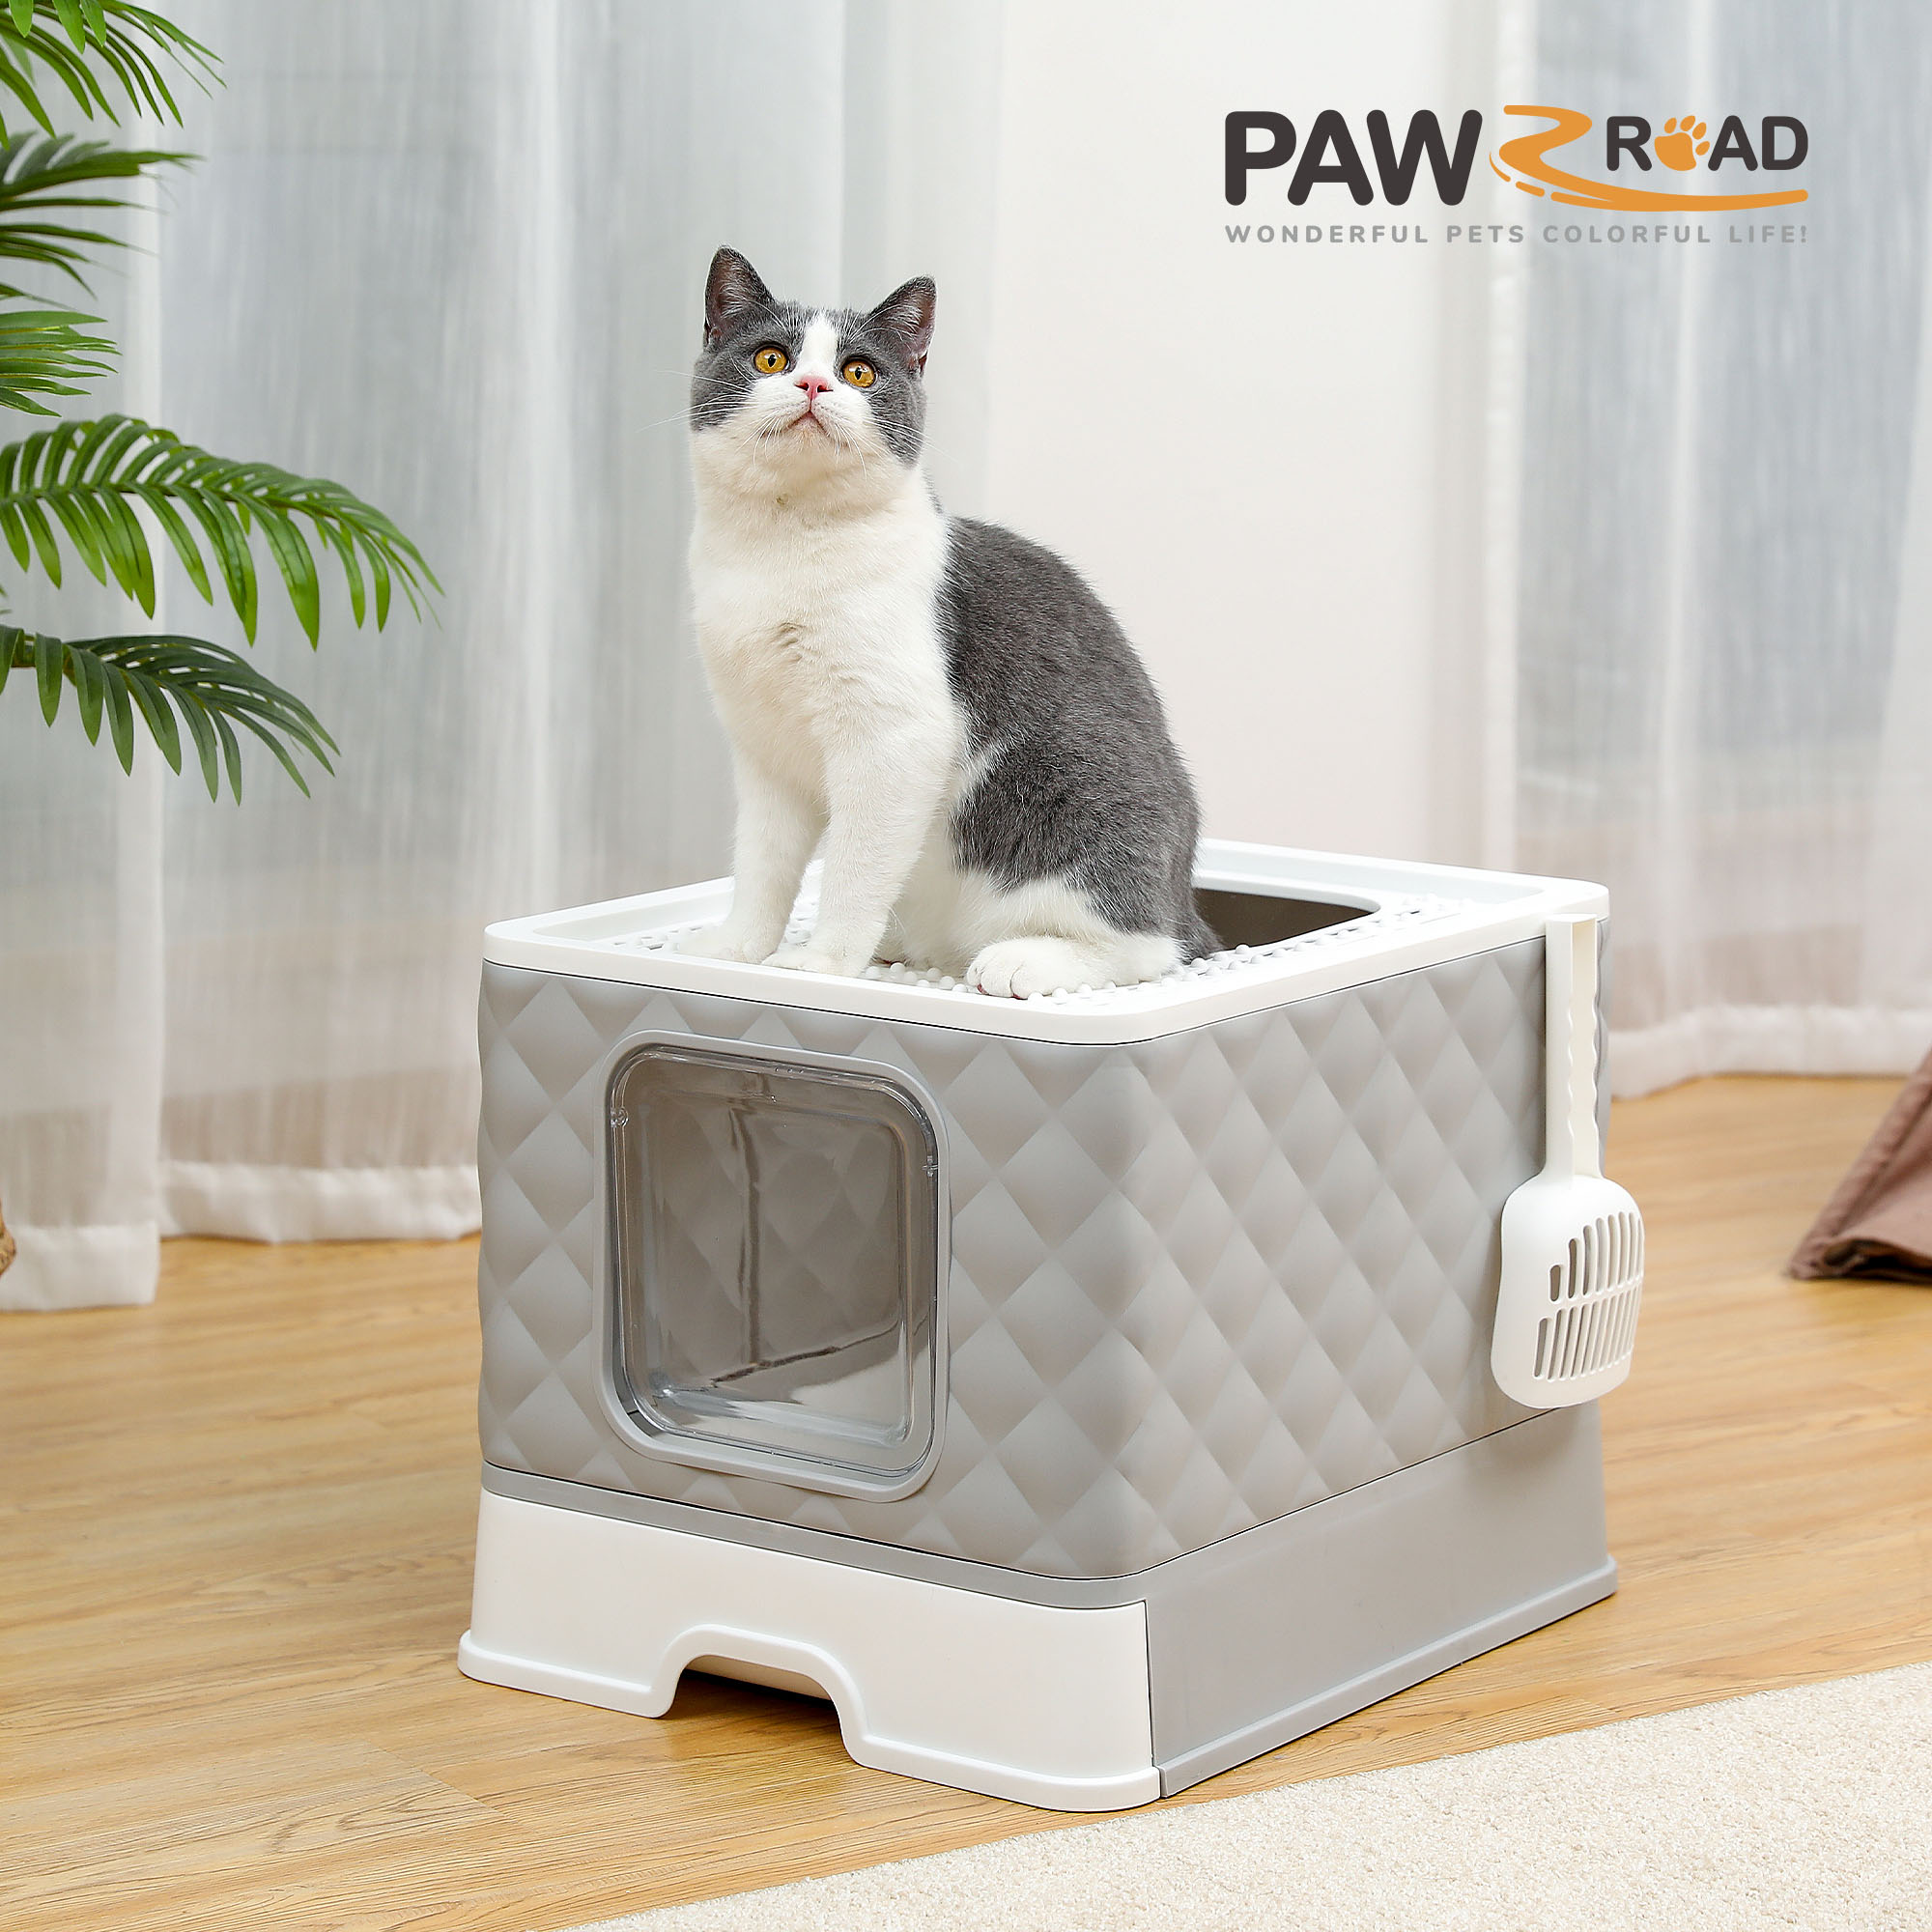 PAWZ Road Enclosed Cat Litter Box Large with Lid Drawer Type Easy to Clean,Gray - image 3 of 13